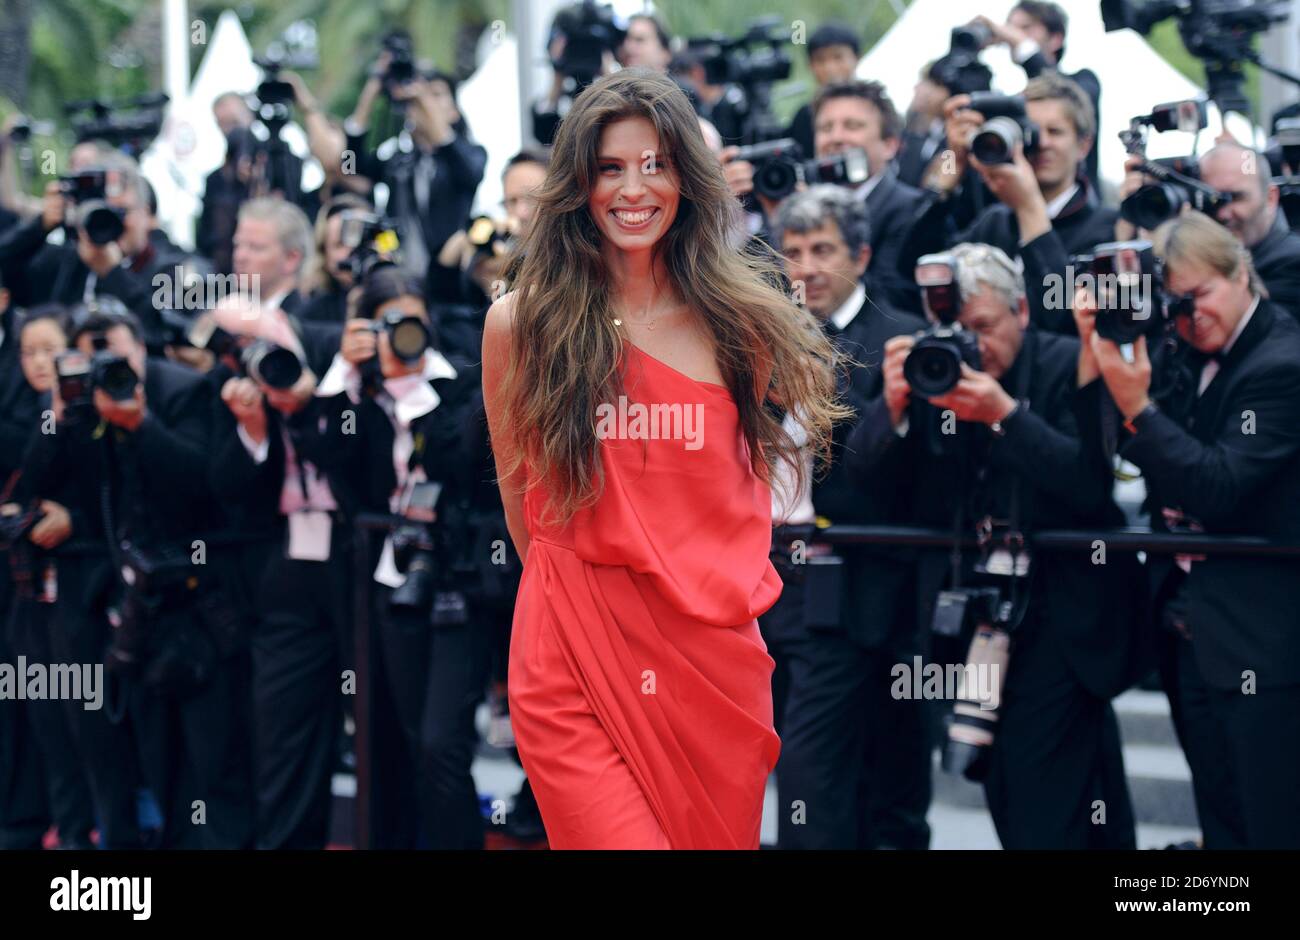 Maiwenn Le Besco arriving at the premiere of Les Bien-Aimes and the closing ceremony of the 64th Cannes International Film Festival, at the Palais des Festivales in Cannes, France. Stock Photo